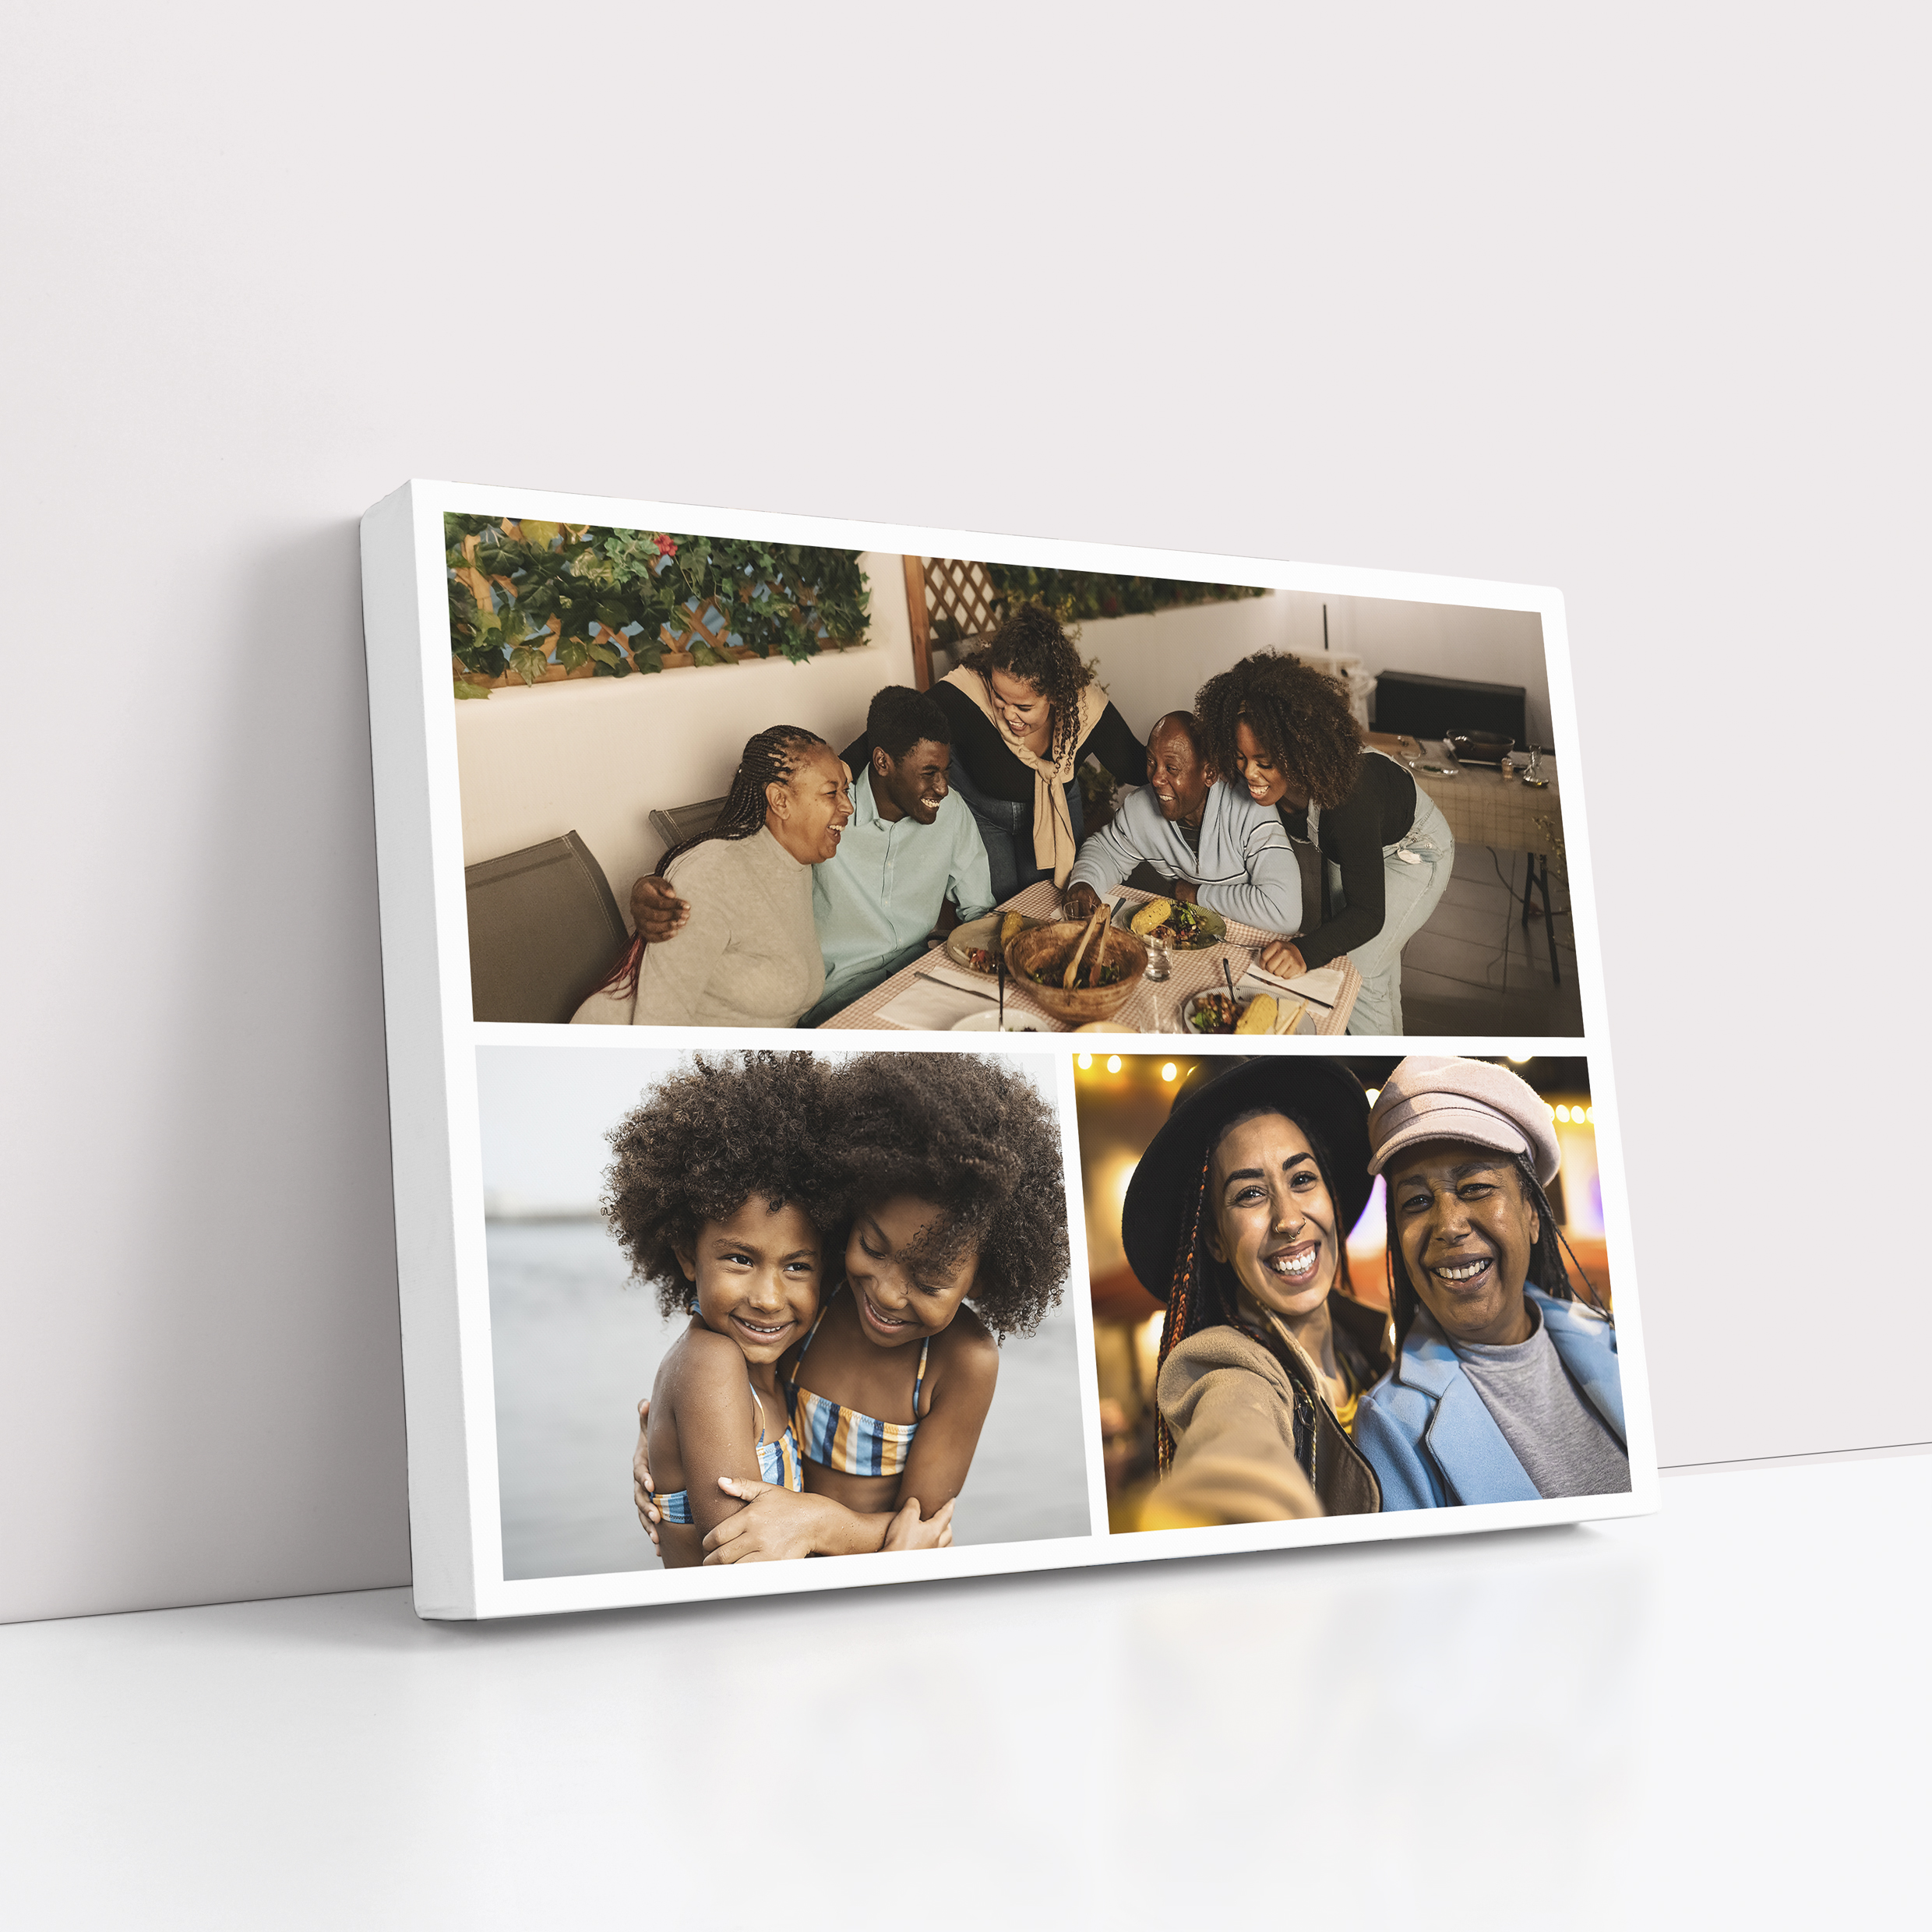 Trilogy Collage Stretch Canvas Print - Celebrate the power of three with a stunning display showcasing 3 cherished photos.